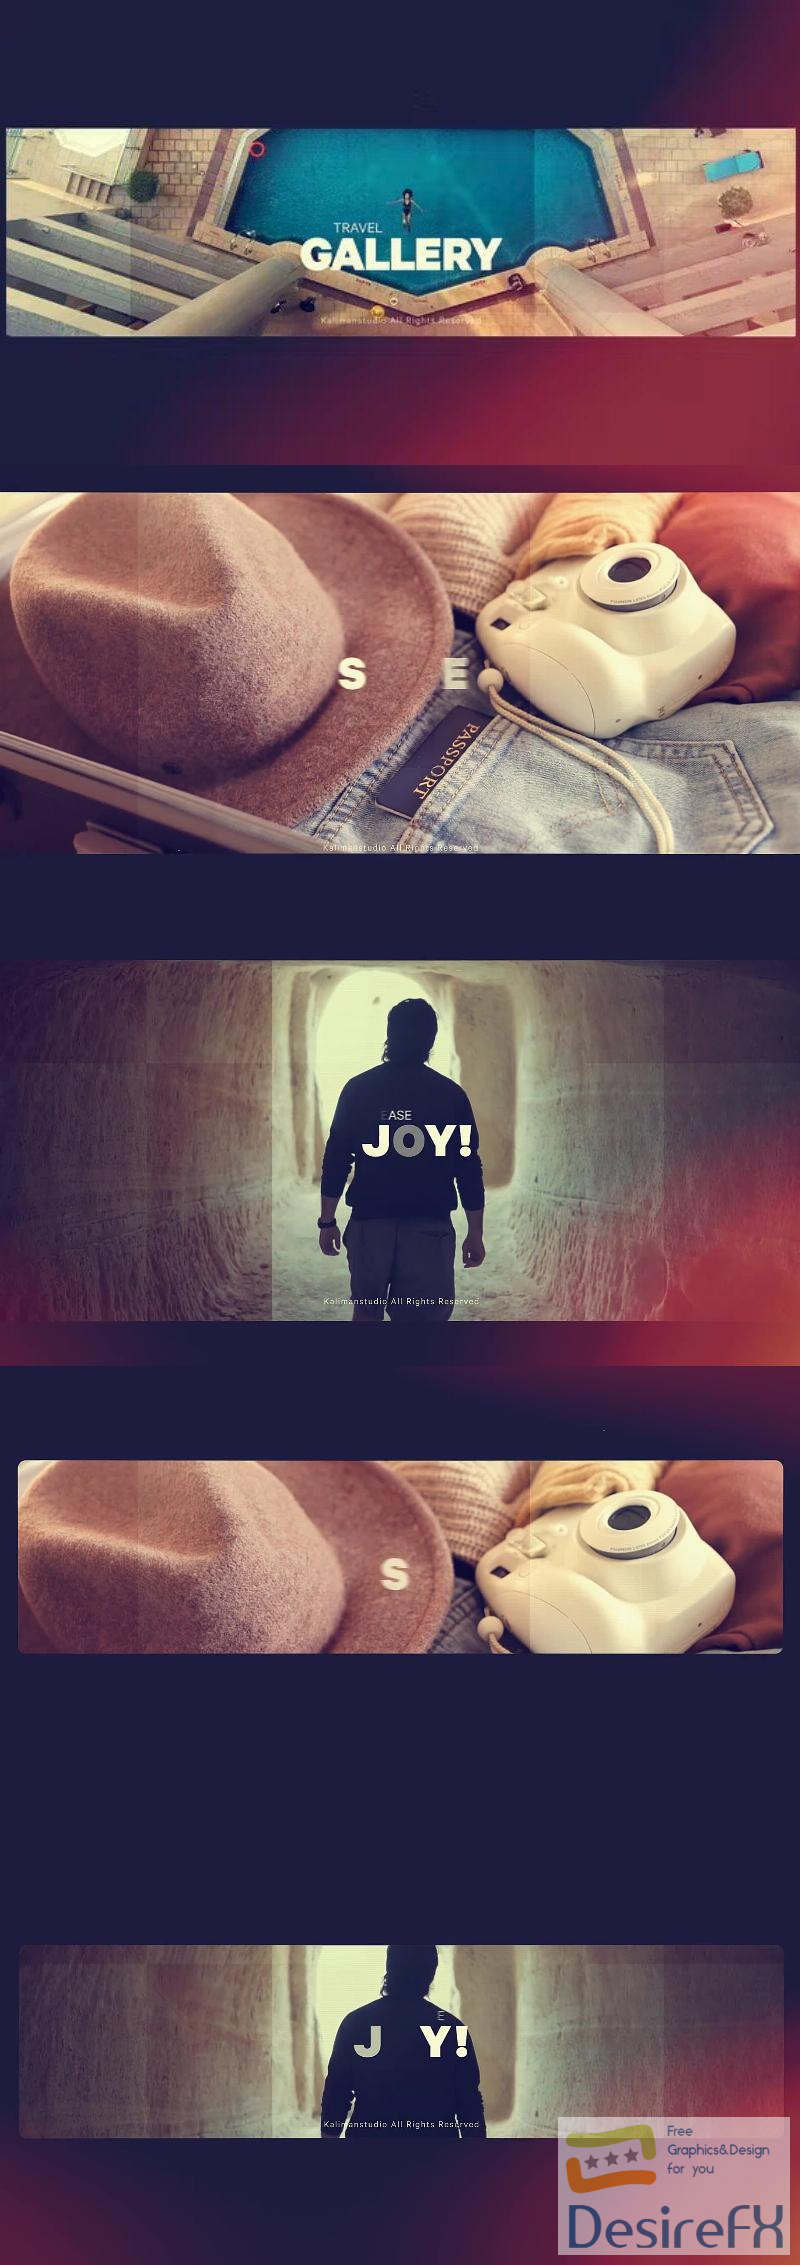 Videohive Scroll Gallery 44873064